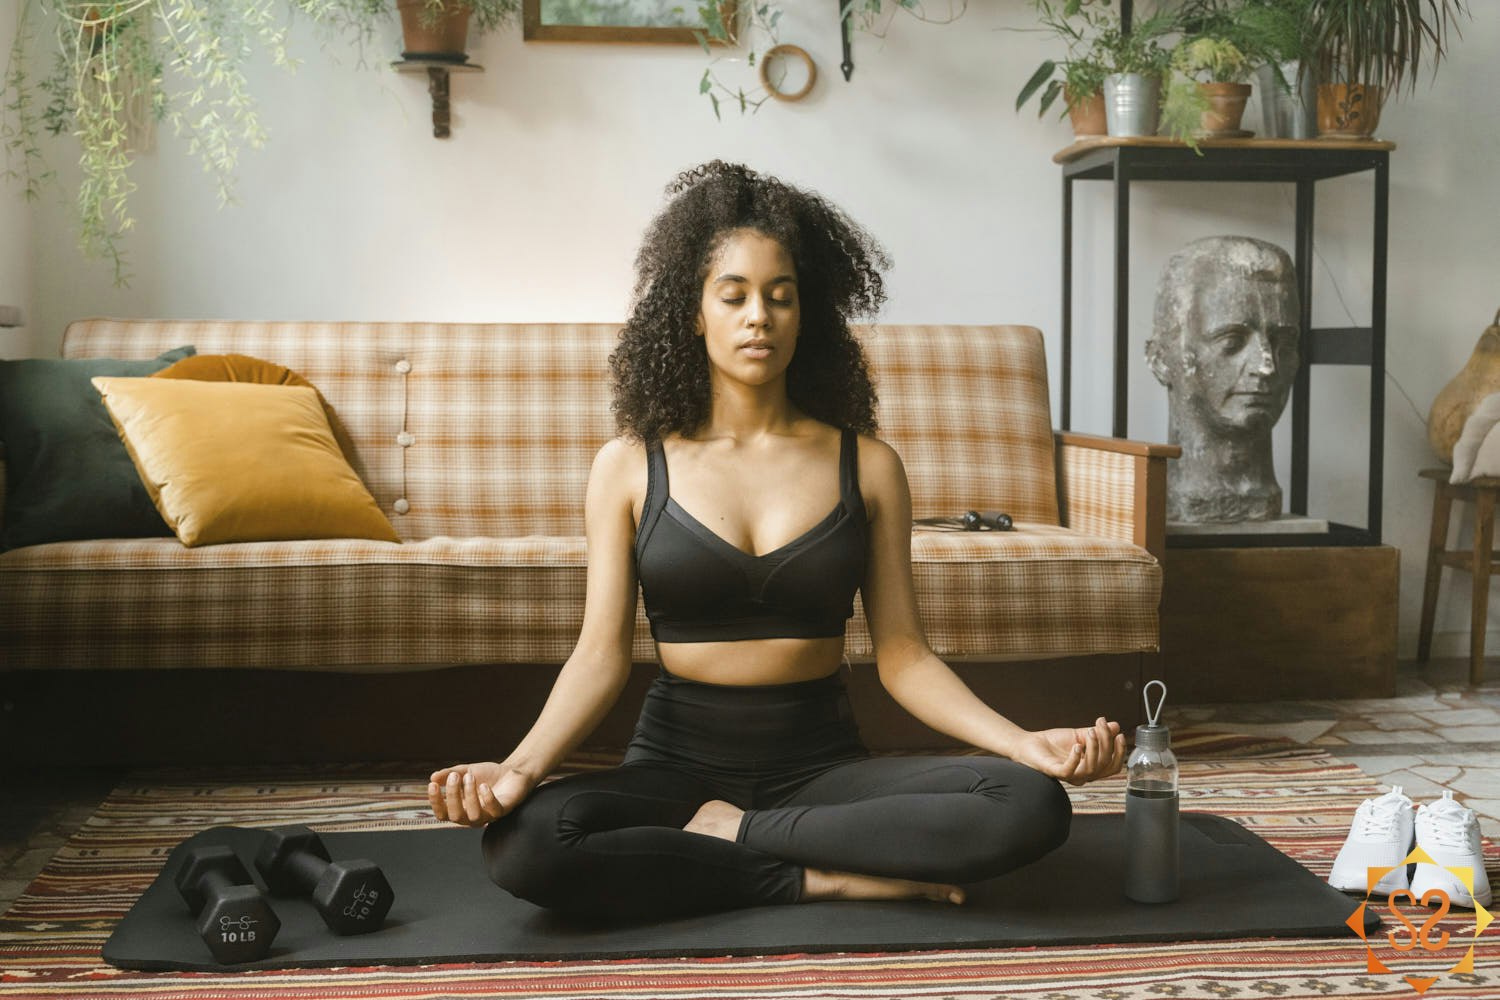 A woman meditating on a yoga mat in her living room, with weights and a water bottle to her sides.